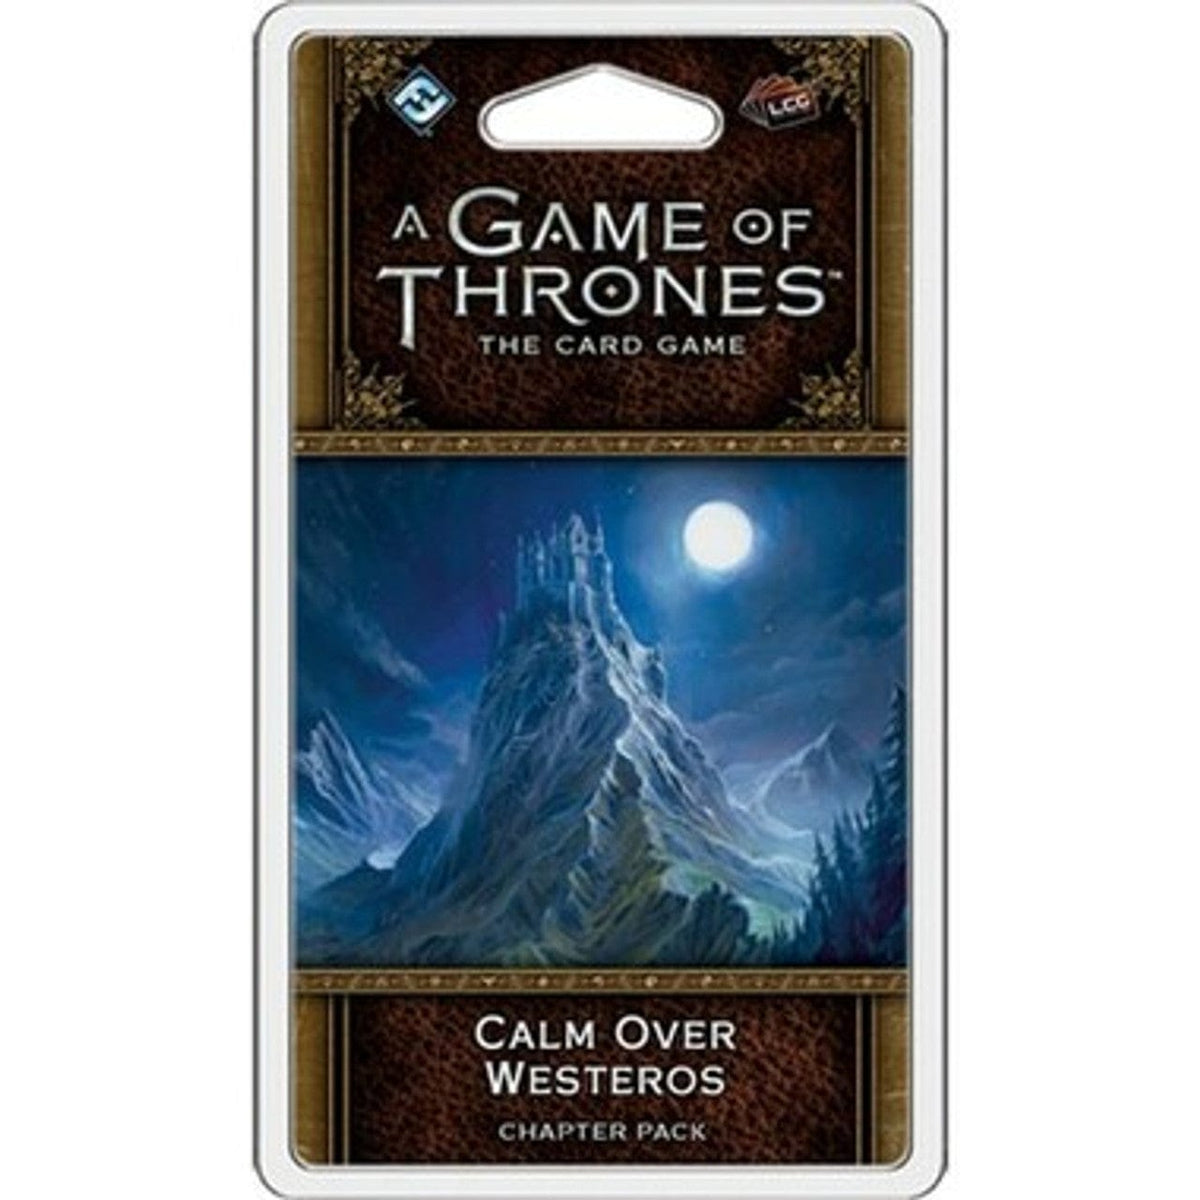 A Game of Thrones 2E: Calm over Westeros Chapter Pack